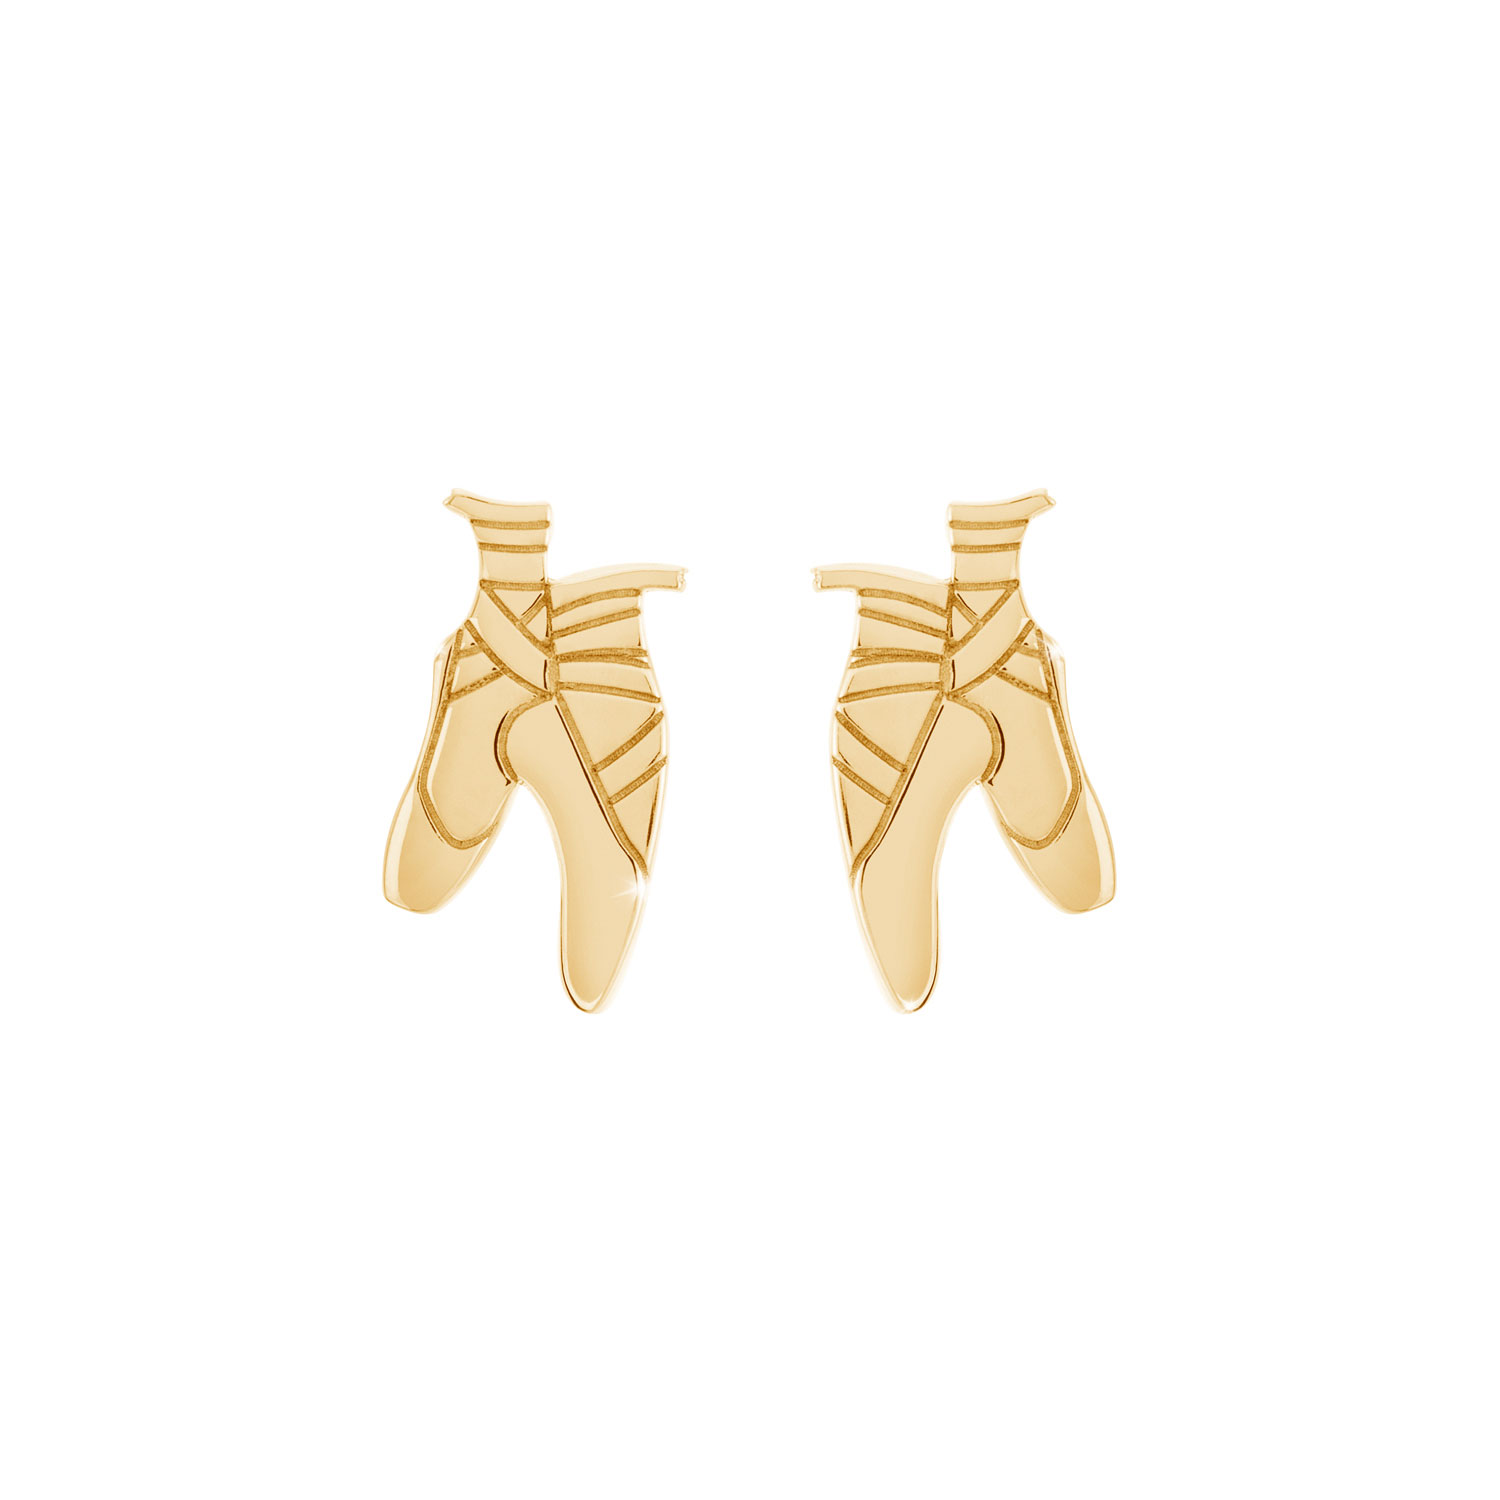 Se igennem inflation Cater Ballet Shoes Earrings made of Solid Gold - Tales In Gold